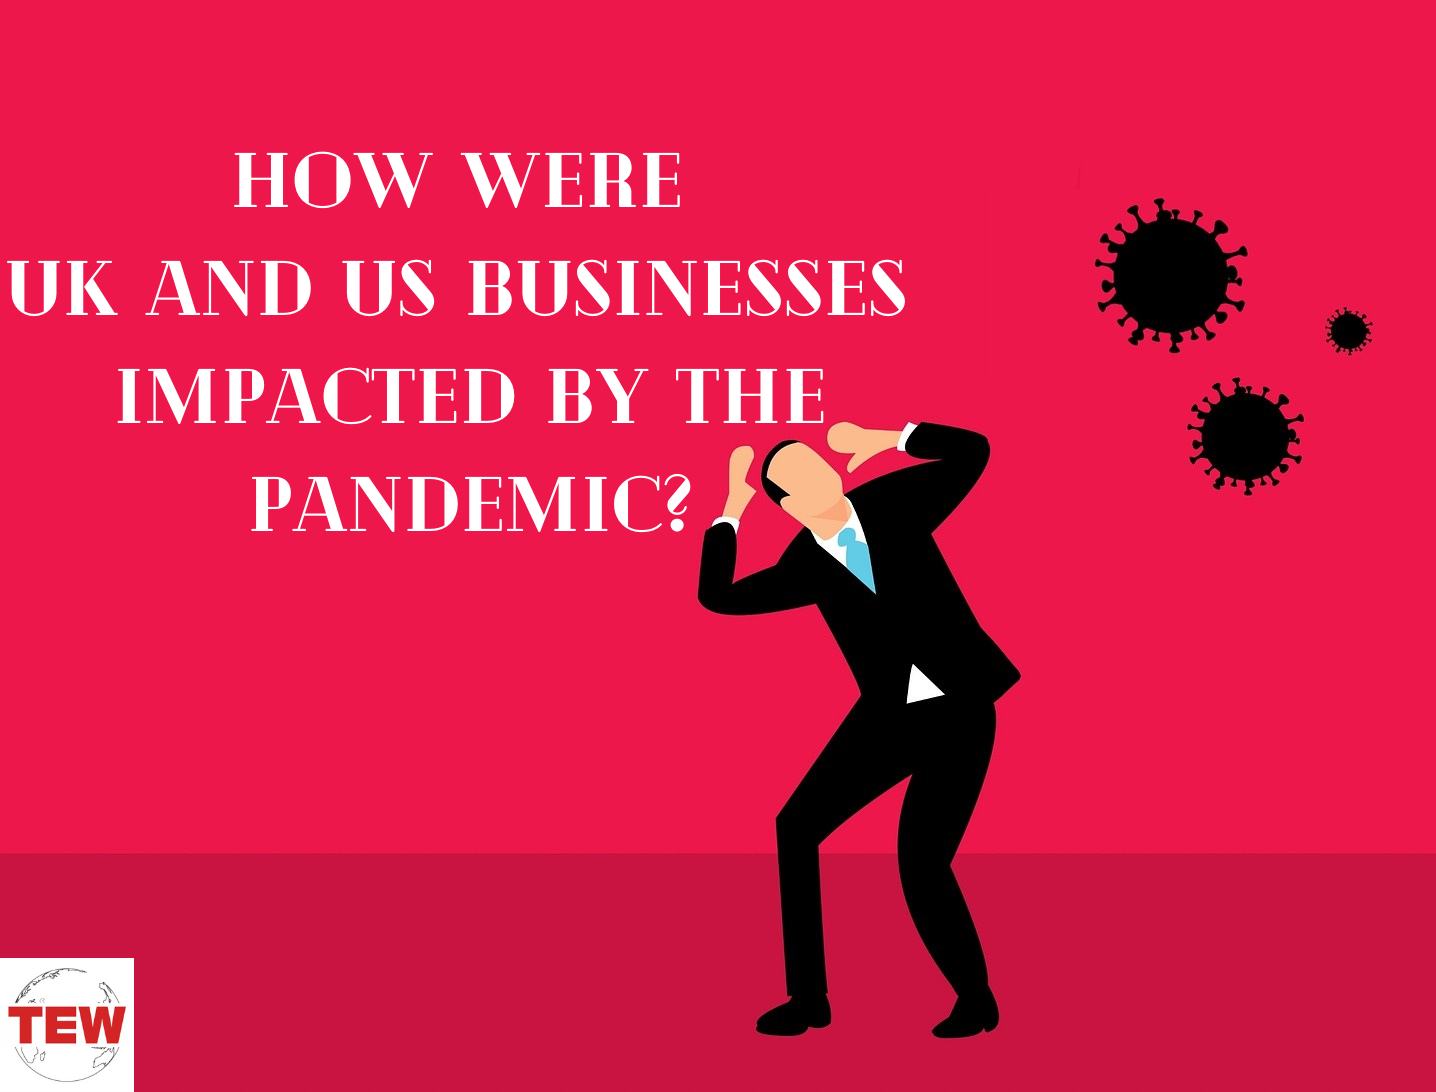 How Were UK and US Businesses Impacted by the Pandemic?